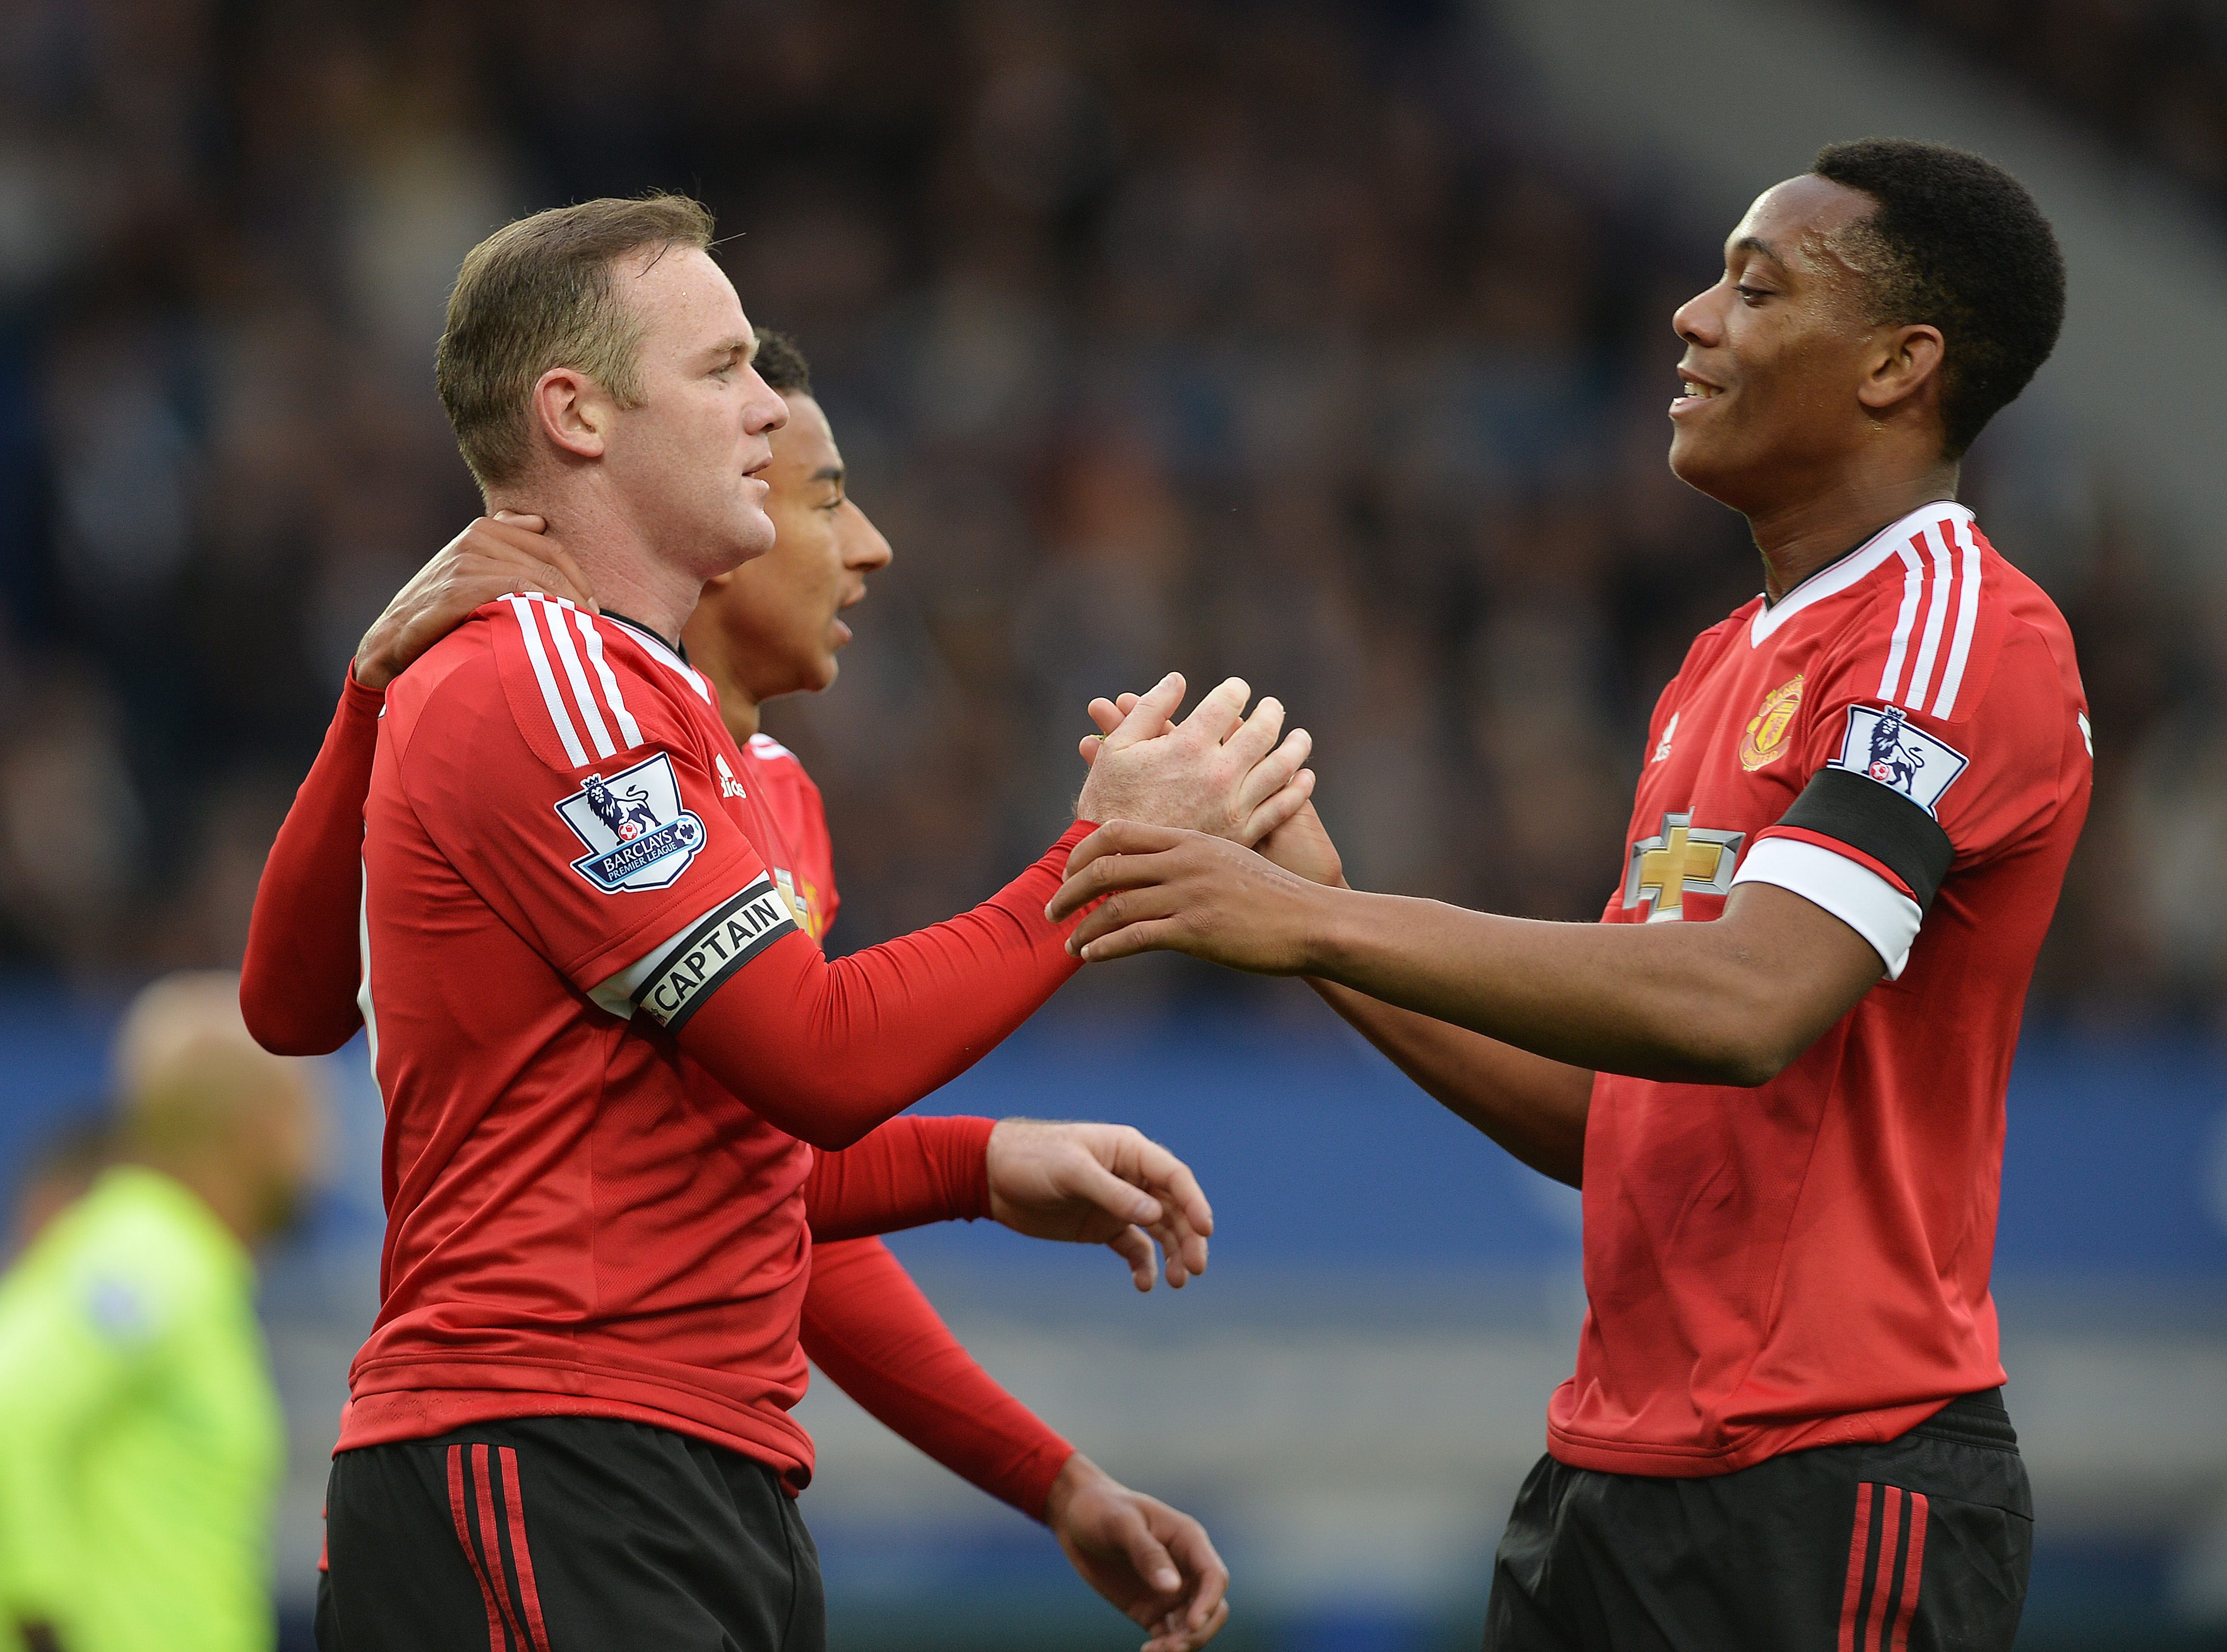 epa04981151 Manchester United's Wayne Rooney (L) is congratulated by Anthony Martial (R) after scoring the 3-0 lead during the English Premier League soccer match between Everton and Manchester United at Goodison Park, Liverpool, Britain, 17 October 2015.  EPA/PETER POWELL EDITORIAL USE ONLY. No use with unauthorized audio, video, data, fixture lists, club/league logos or 'live' services. Online in-match use limited to 75 images, no video emulation. No use in betting, games or single club/league/player publications